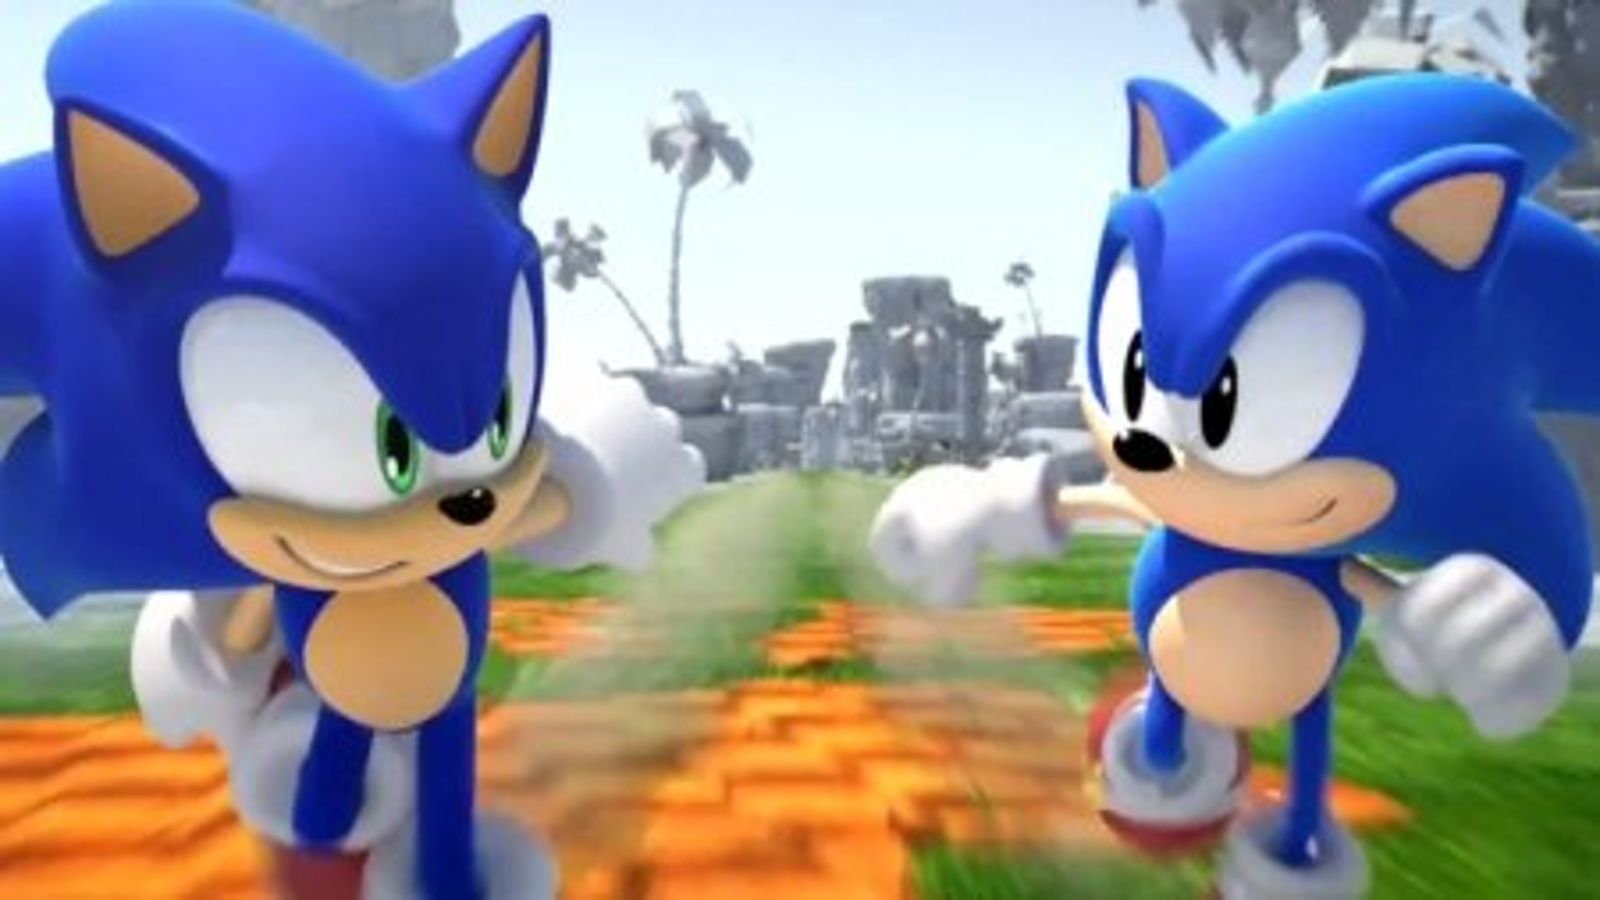 This is how classic sonic should've looked in Sonic Generations